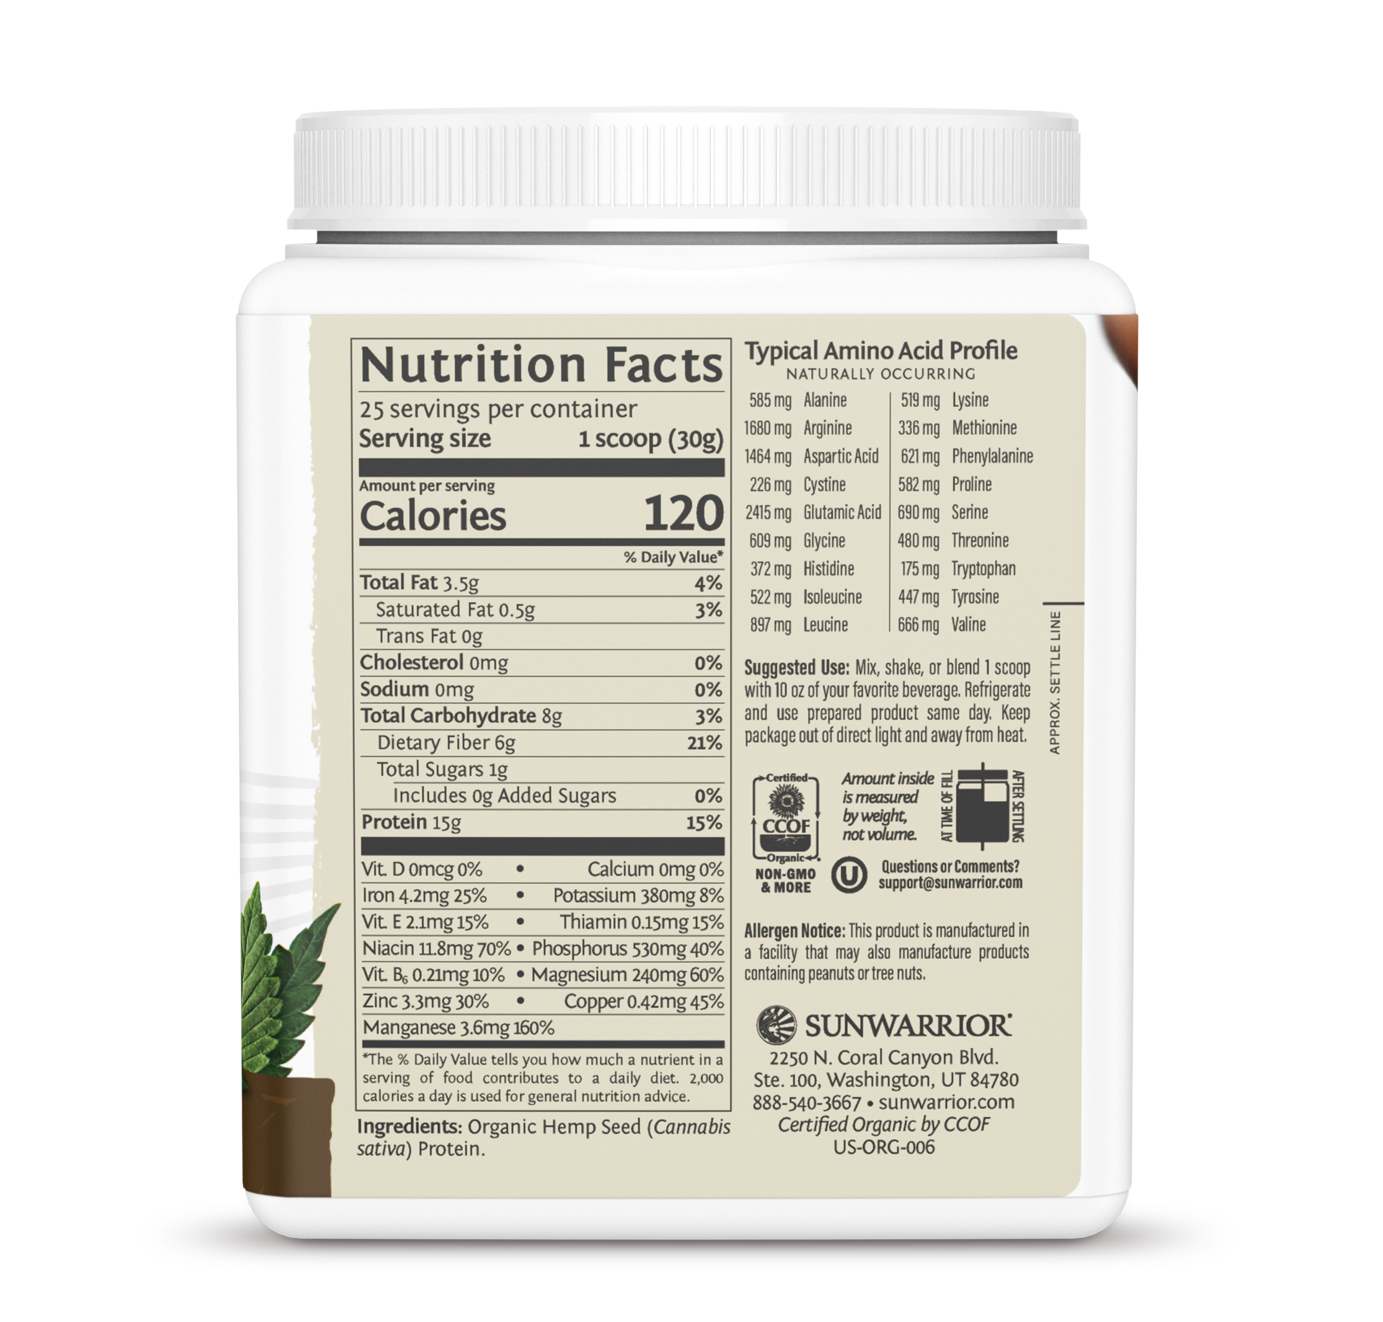 NUTRITION FACTS & INGREDIENTS